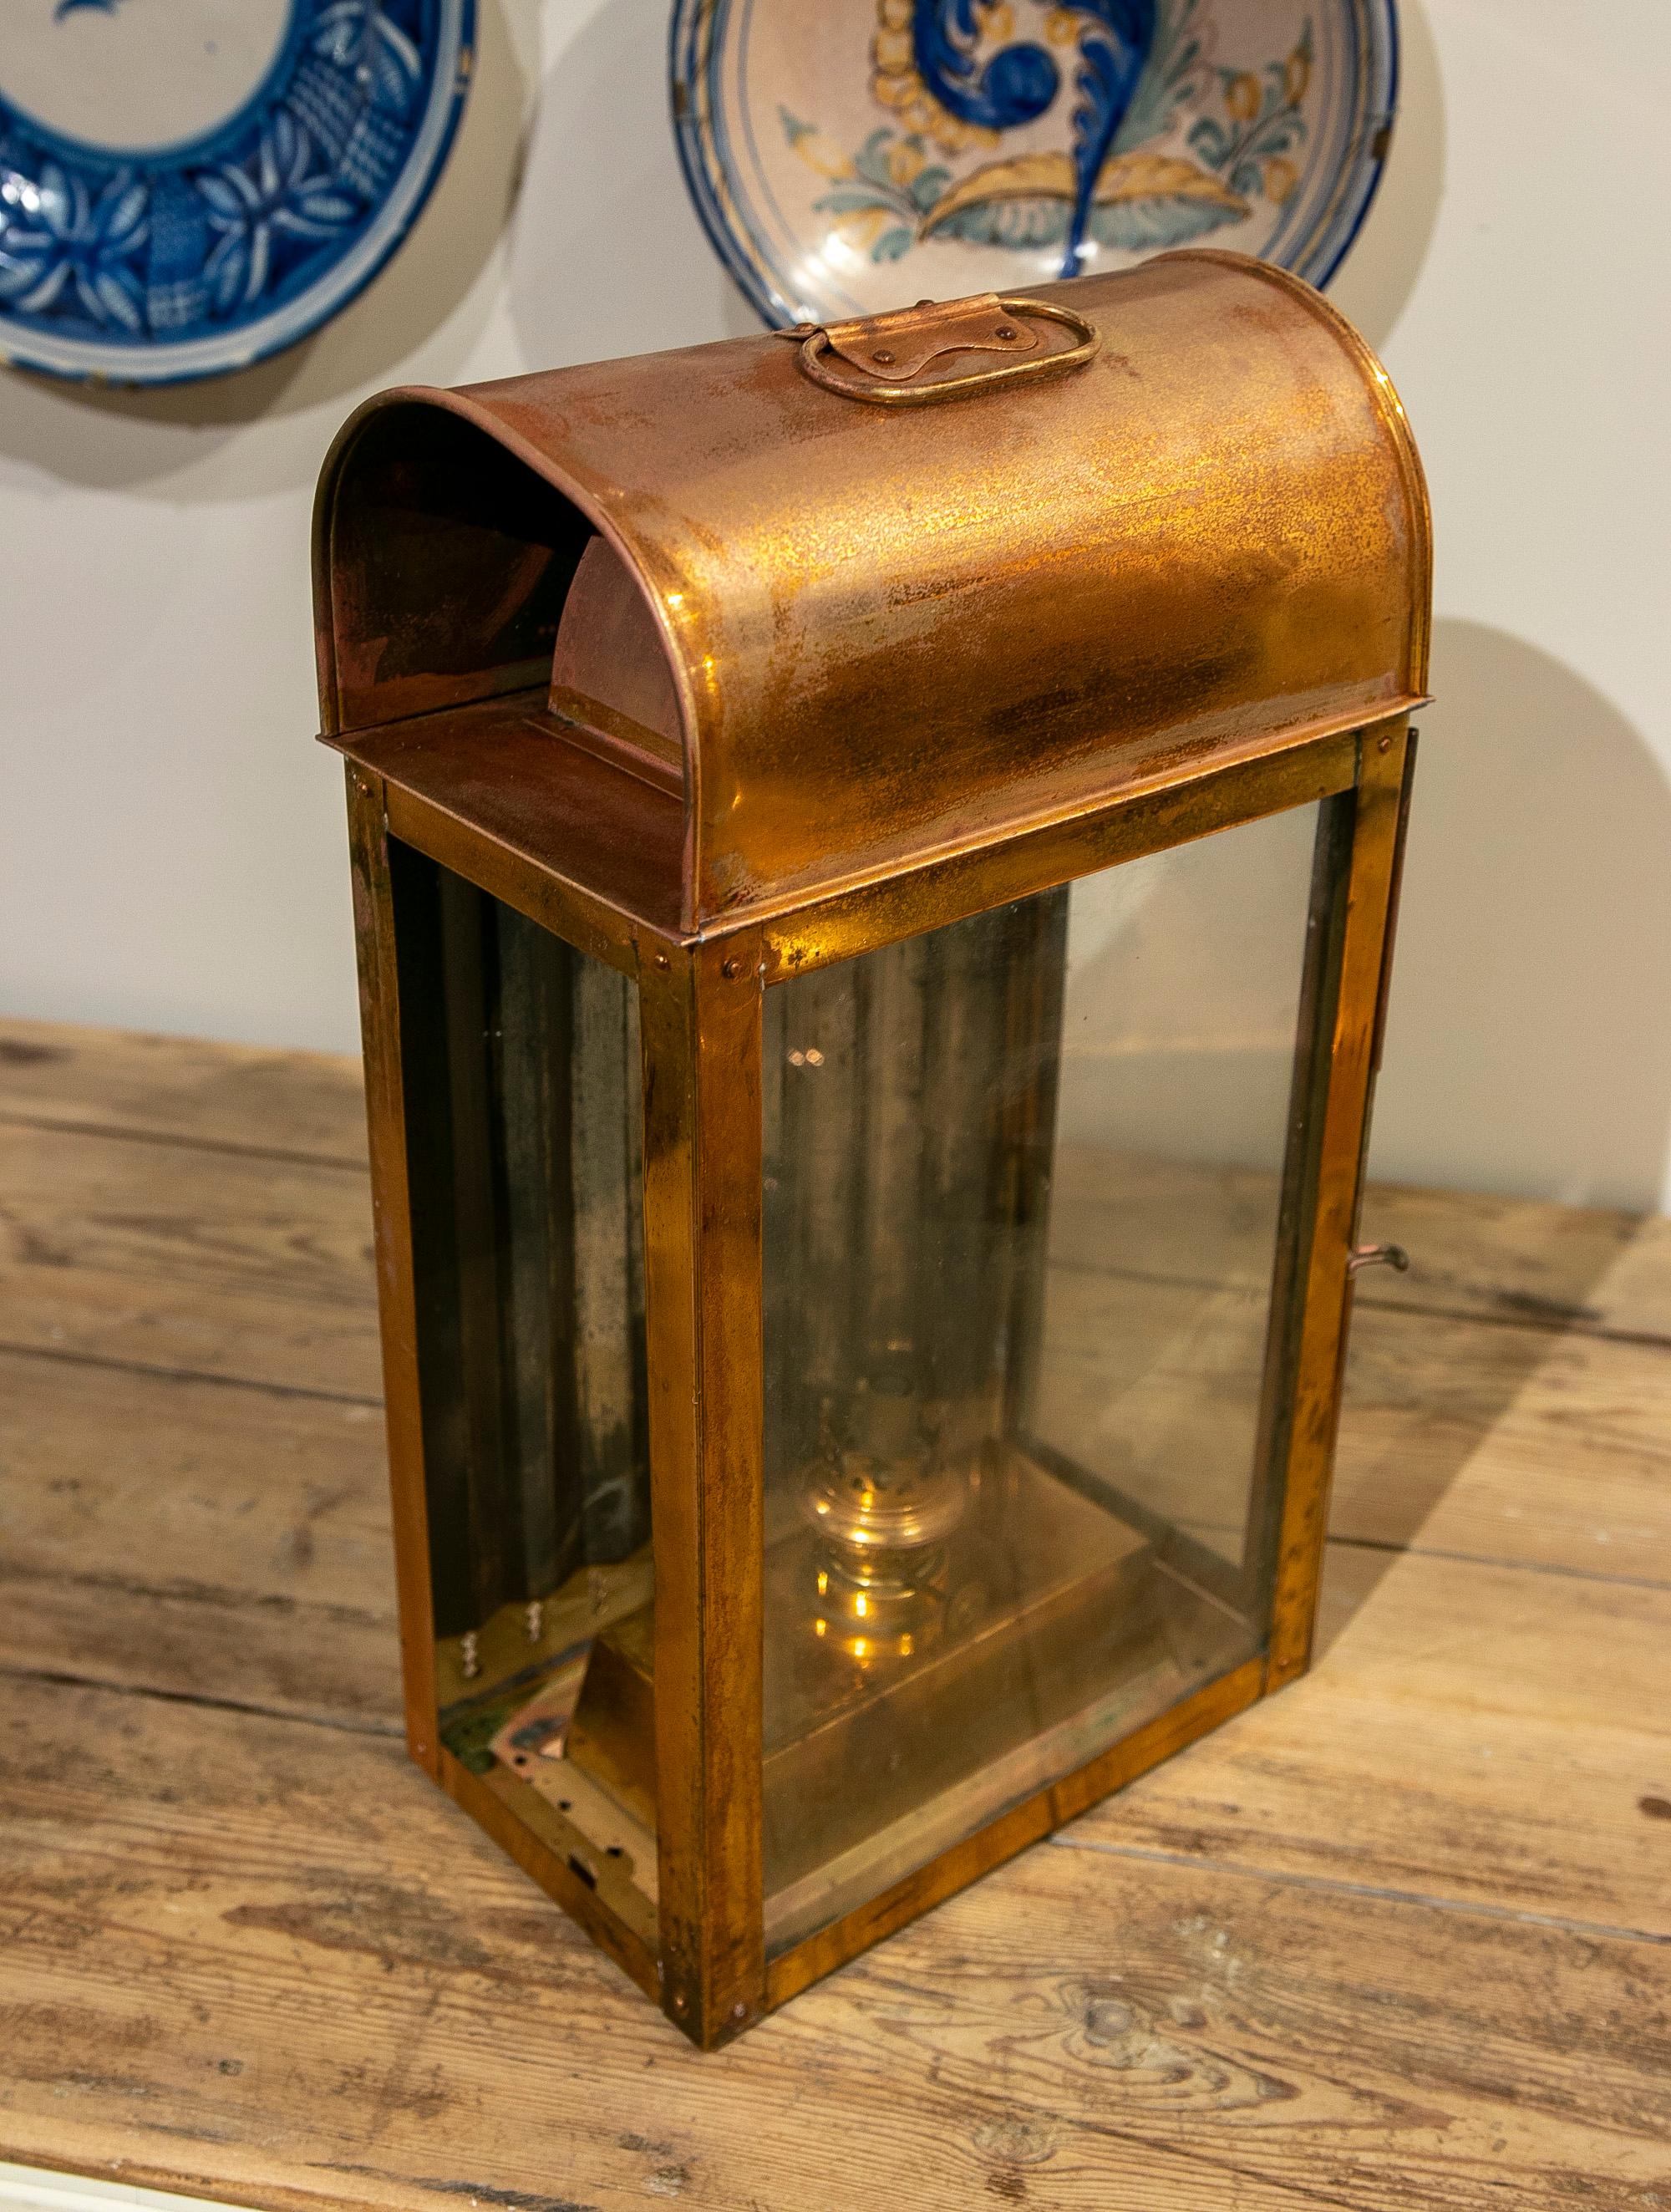 1950s, English Copper Oil Lantern with Glass and Mirror For Sale 2